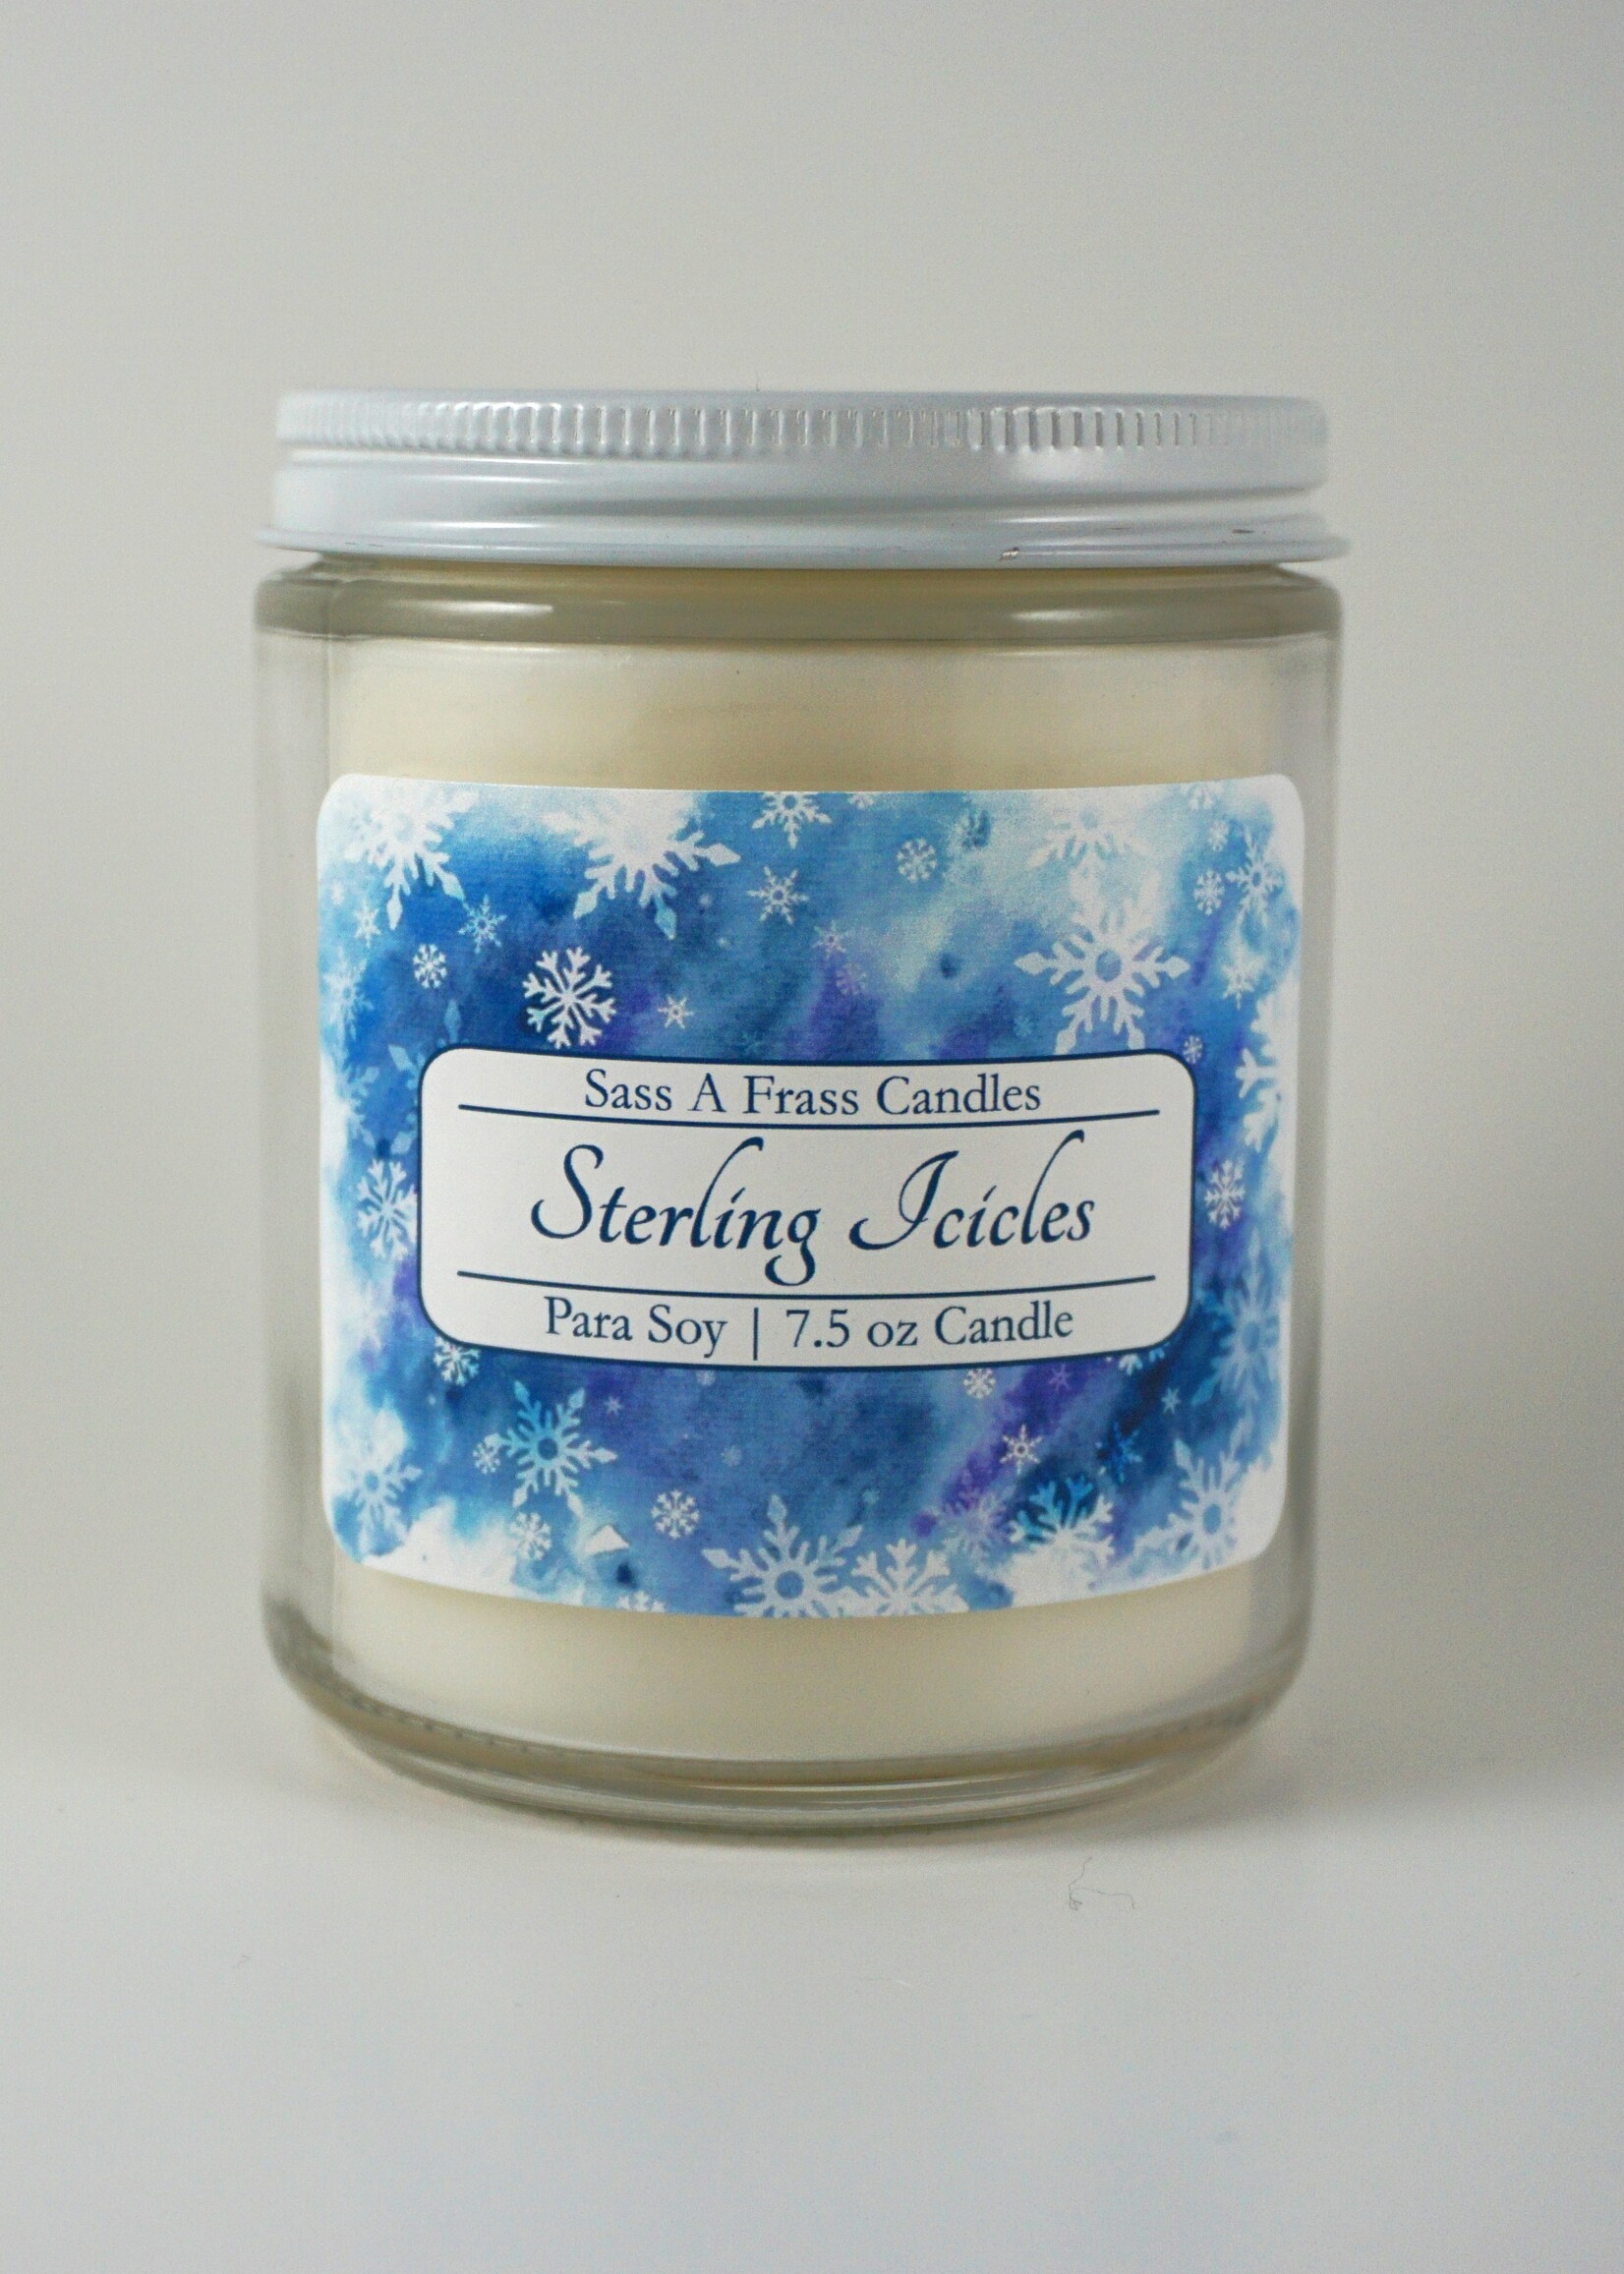 Sterling Icicles 7.5 oz Candle